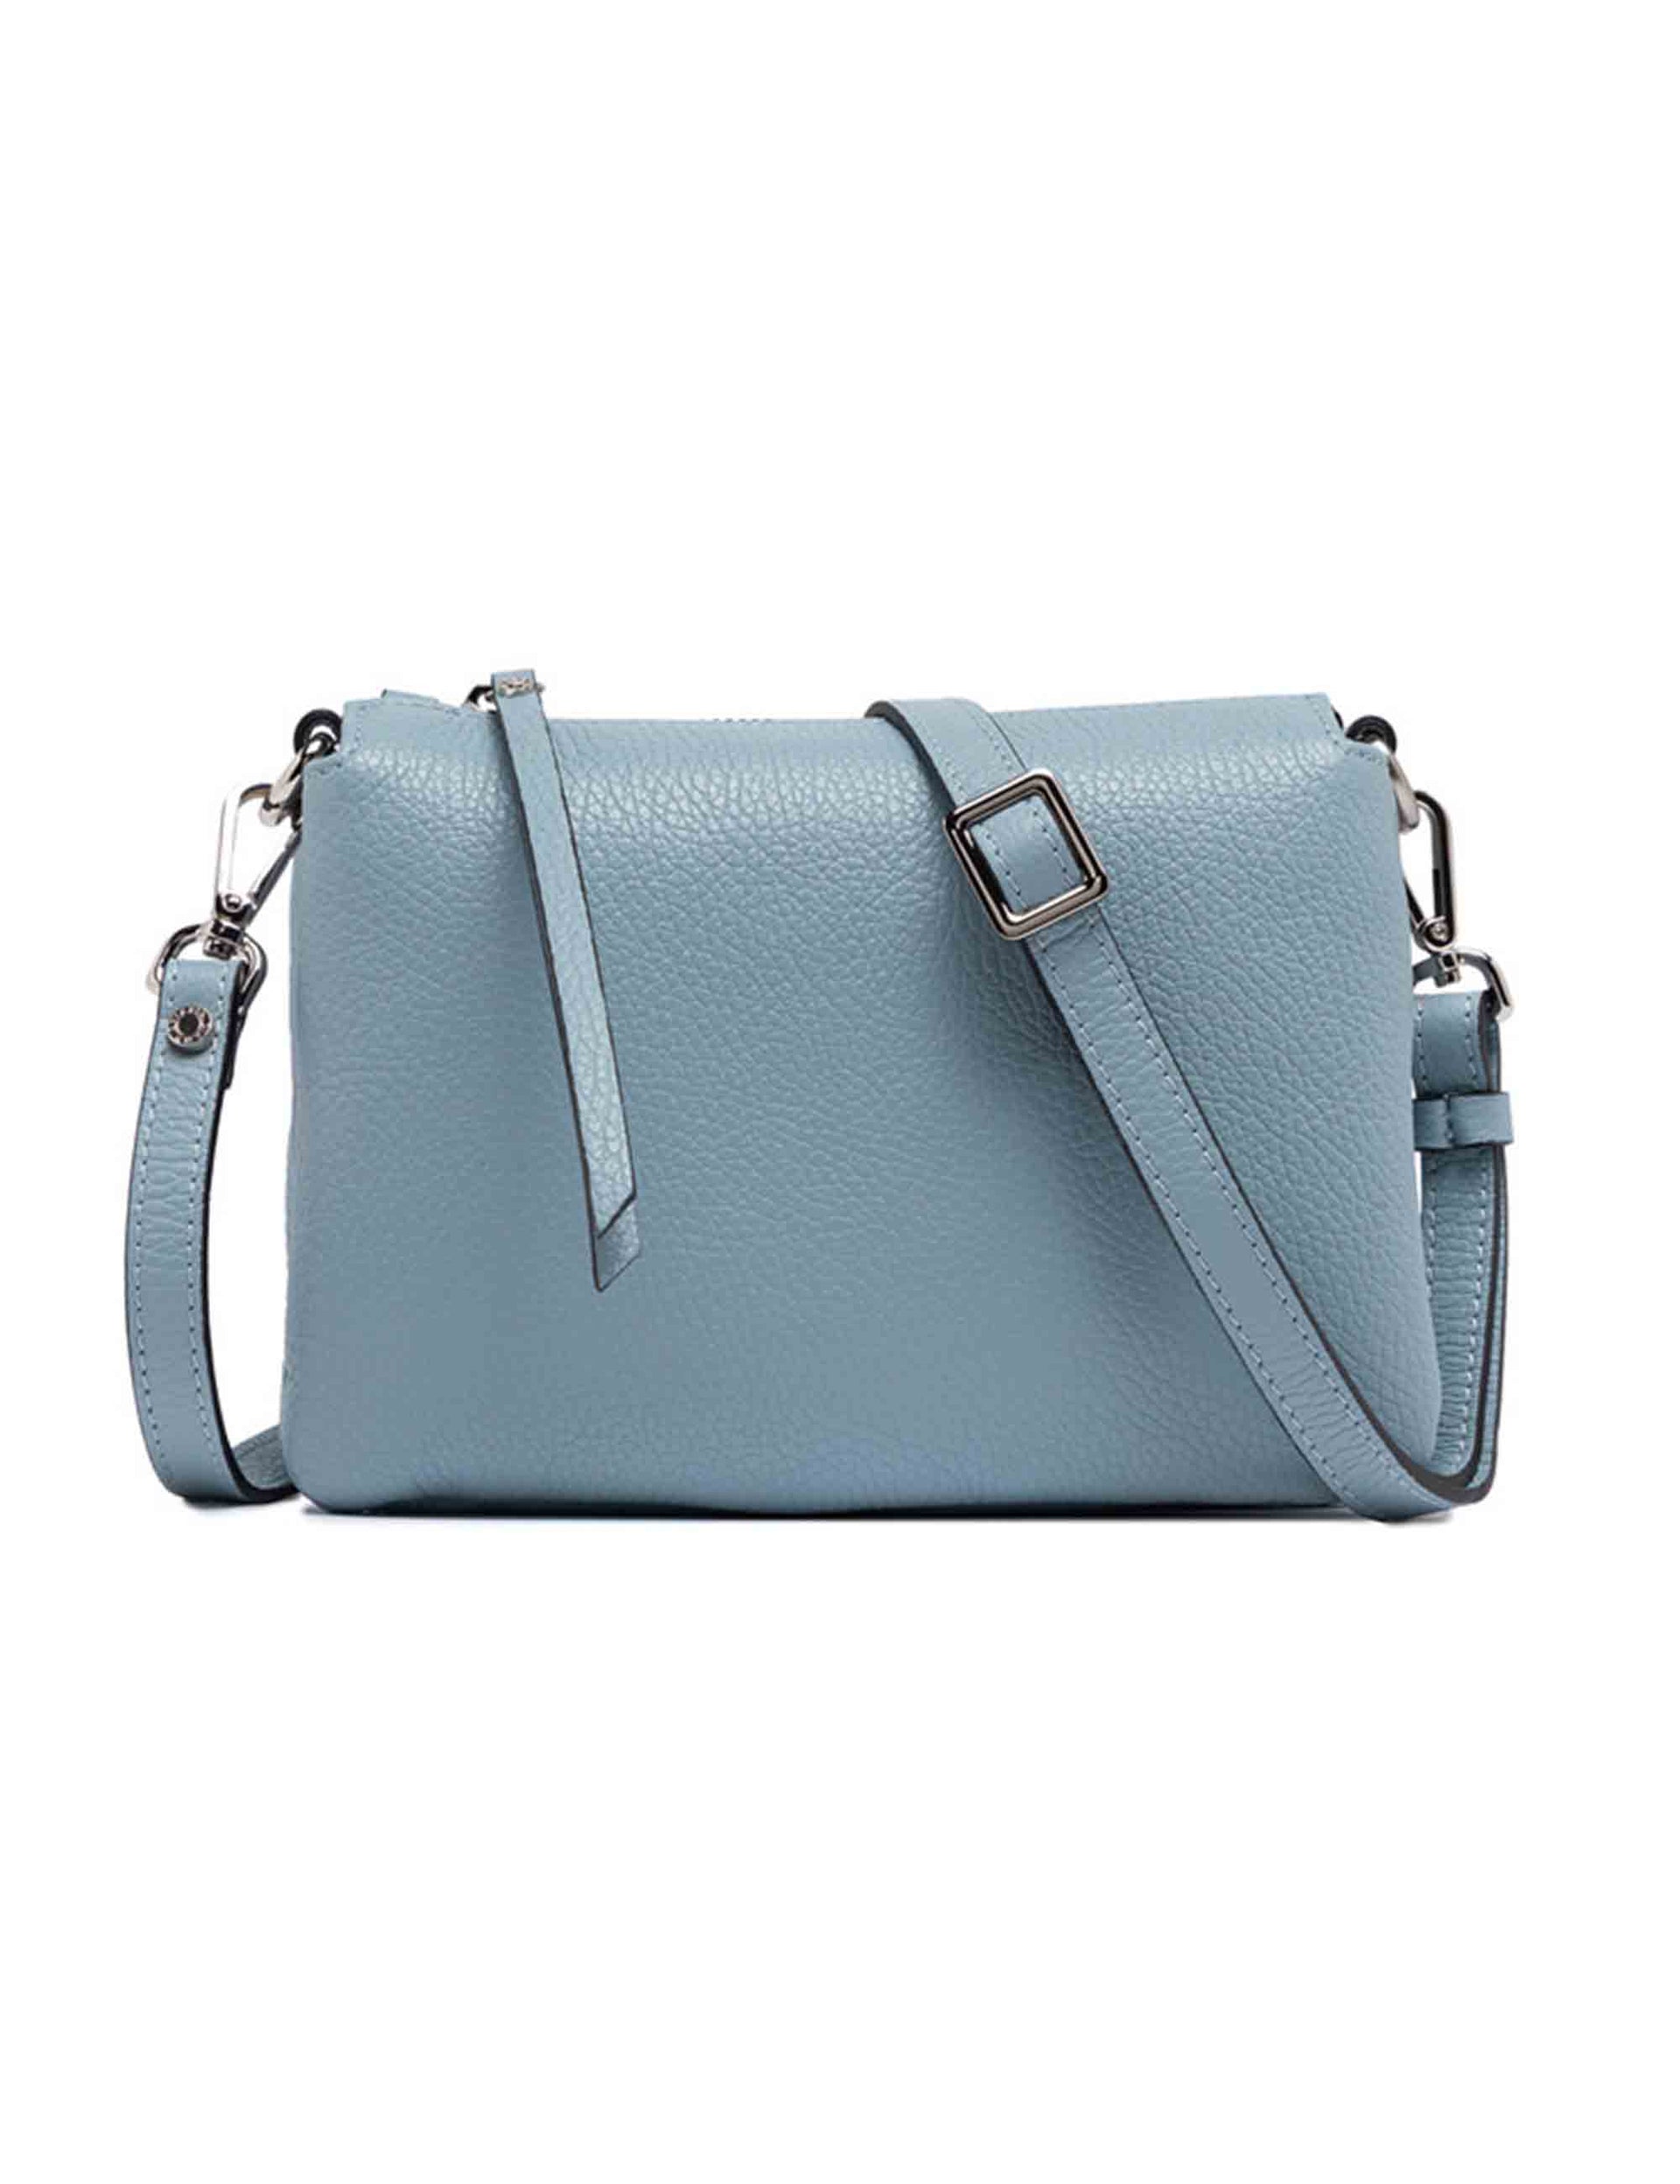 Three women's clutch bags in light blue leather with matching removable shoulder strap